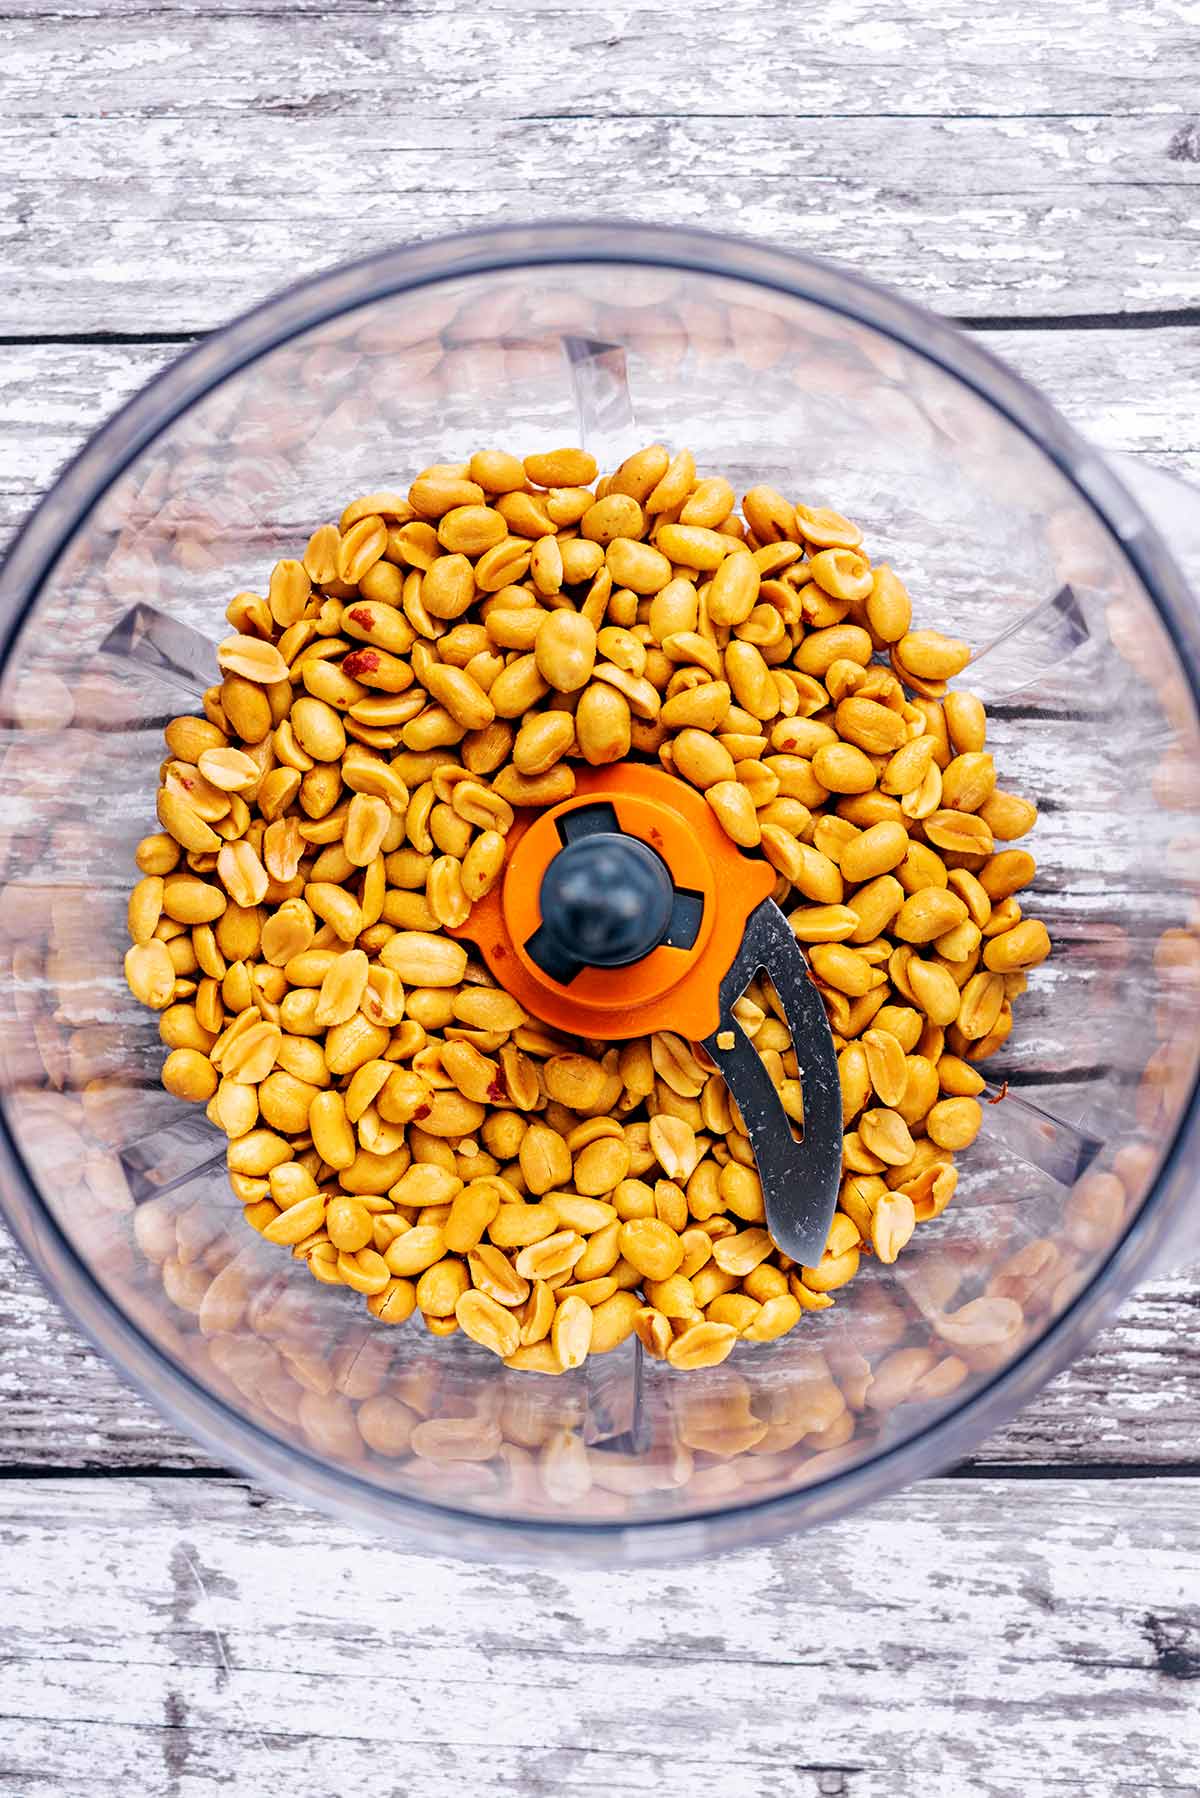 A food processor bowl containing loads of peanuts.